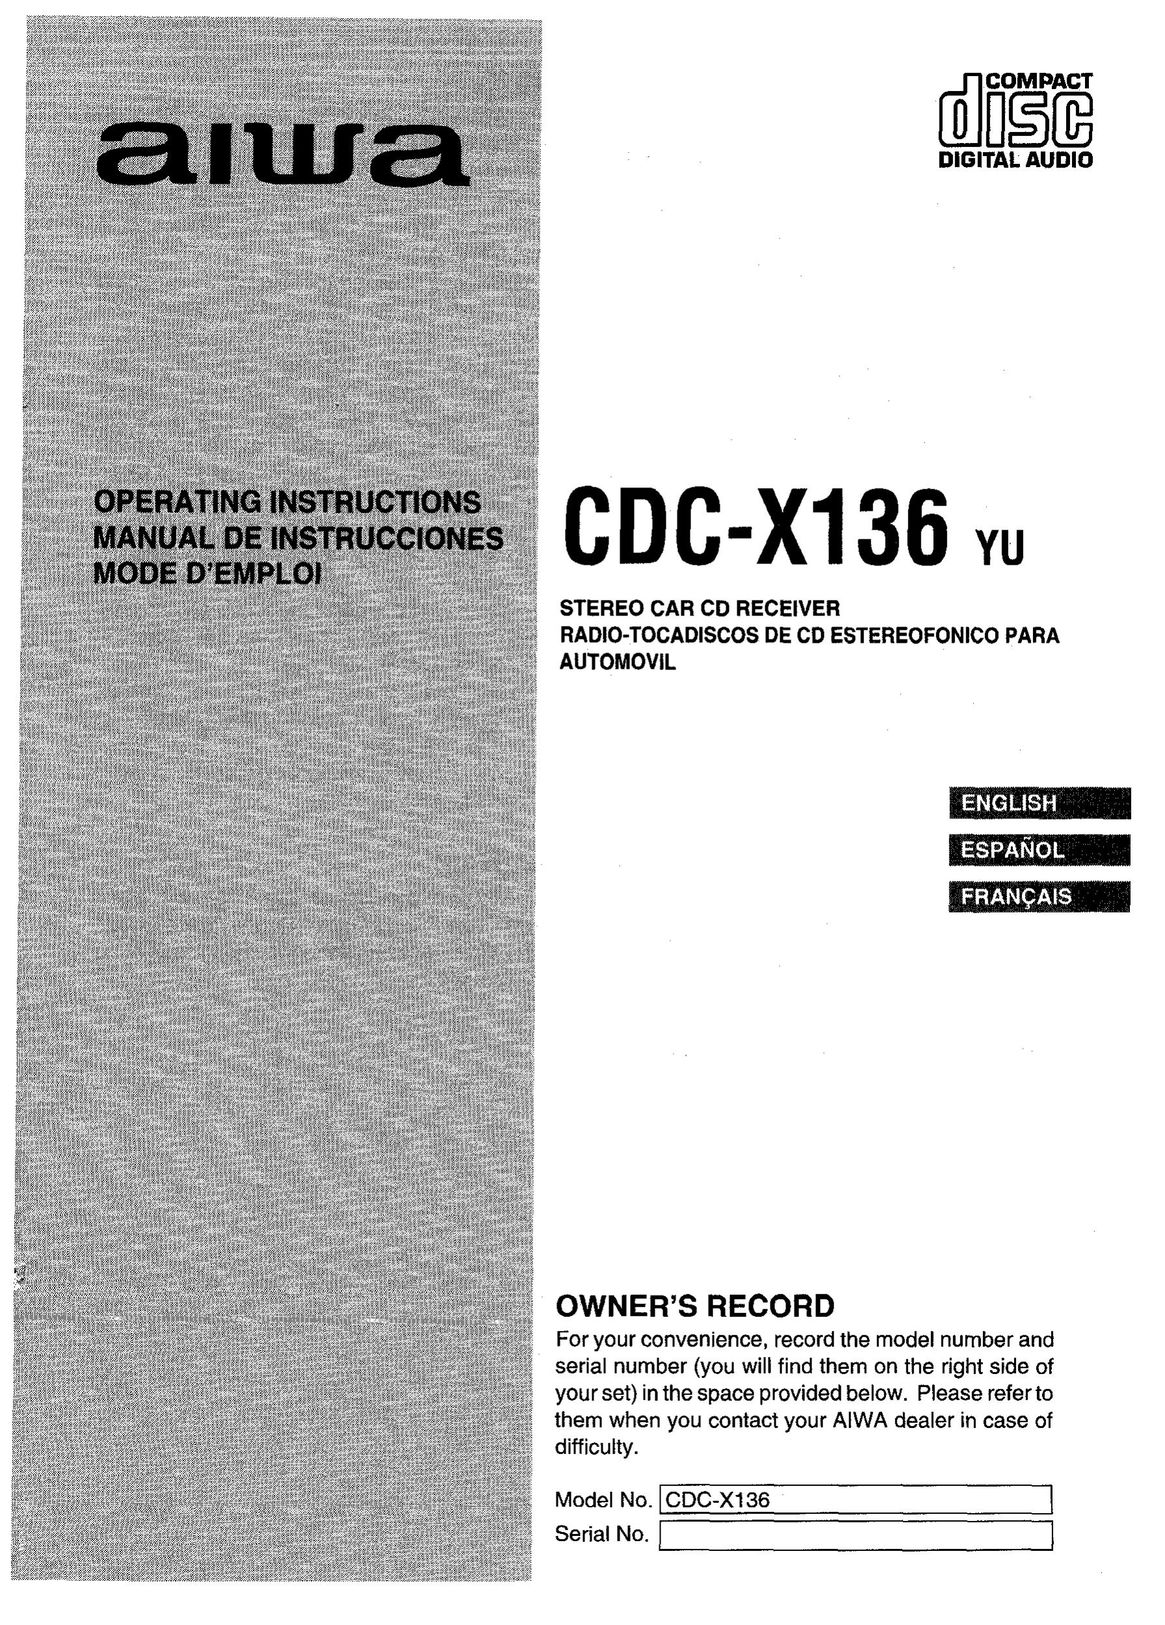 Aiwa CDC-X136 Car Stereo System User Manual (Page 1)